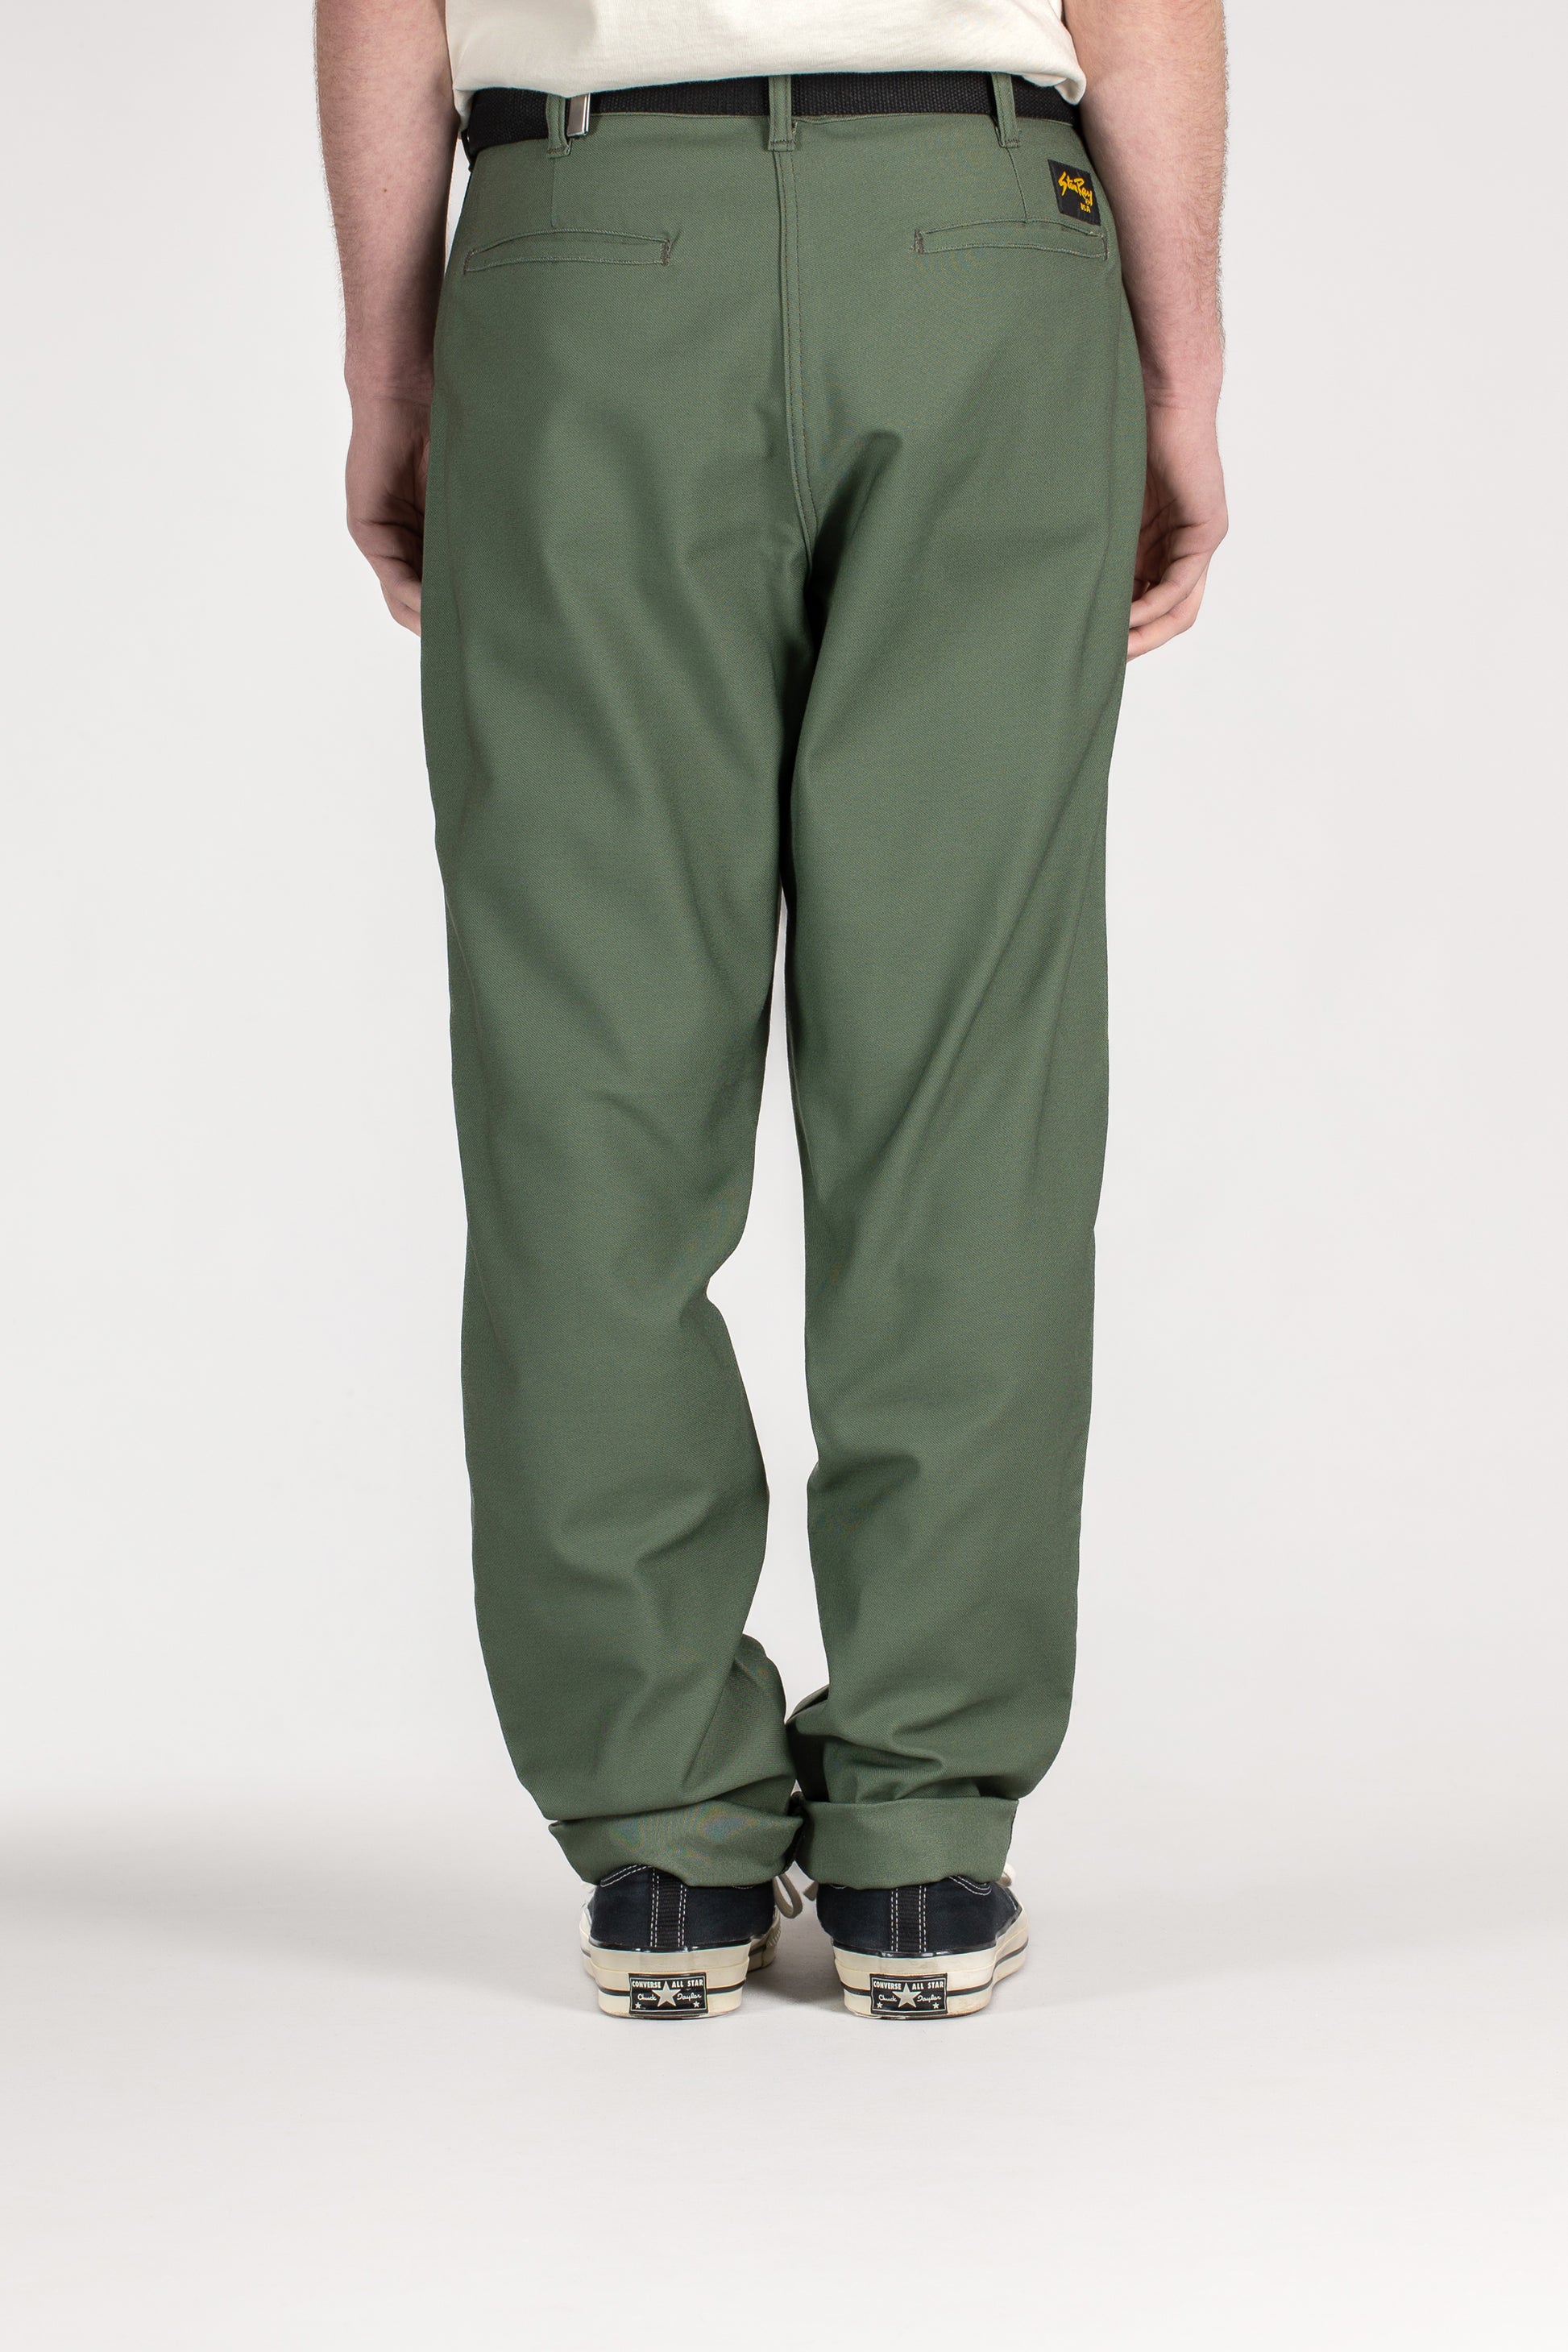 Easy Chino (Olive Sateen 8.5oz) - Stan Ray